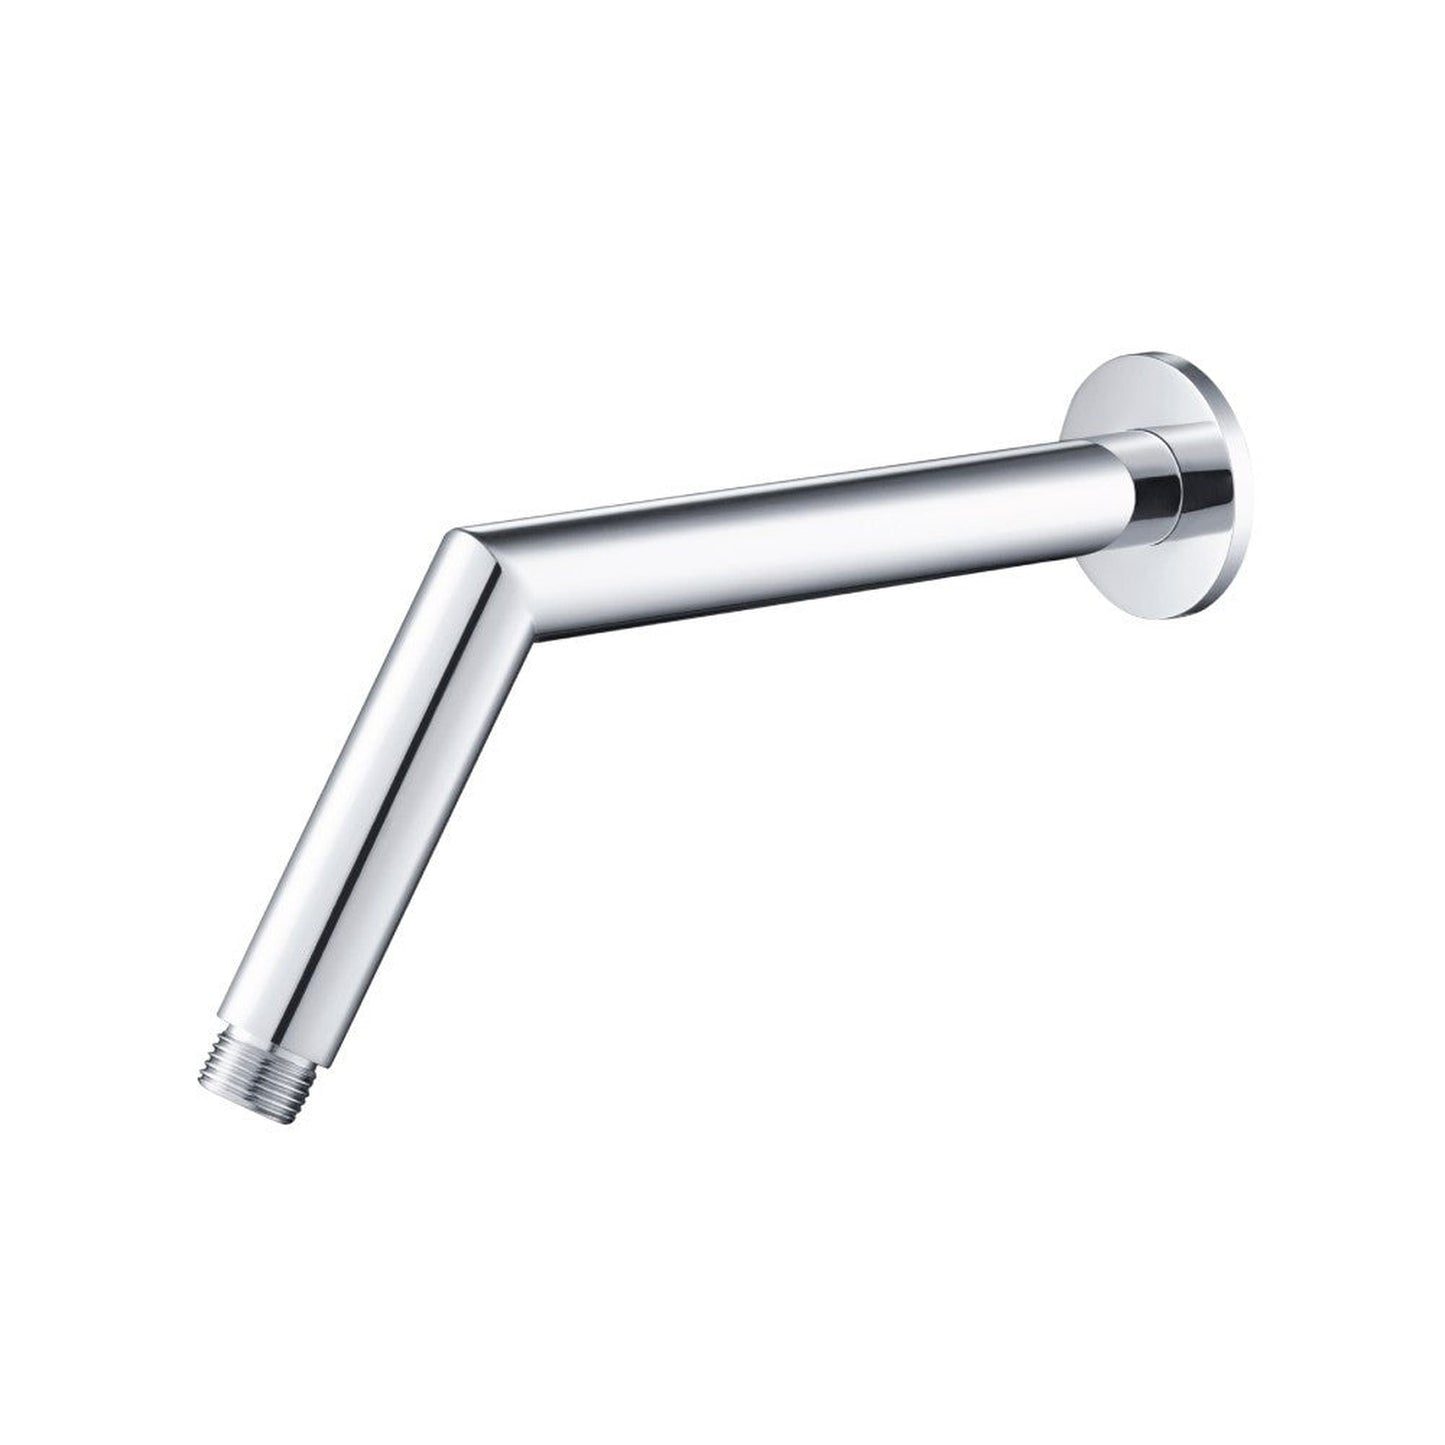 Isenberg Universal Fixtures 9" Chrome Solid Brass Wall-Mounted Standard Shower Arm With Round Sliding Flange